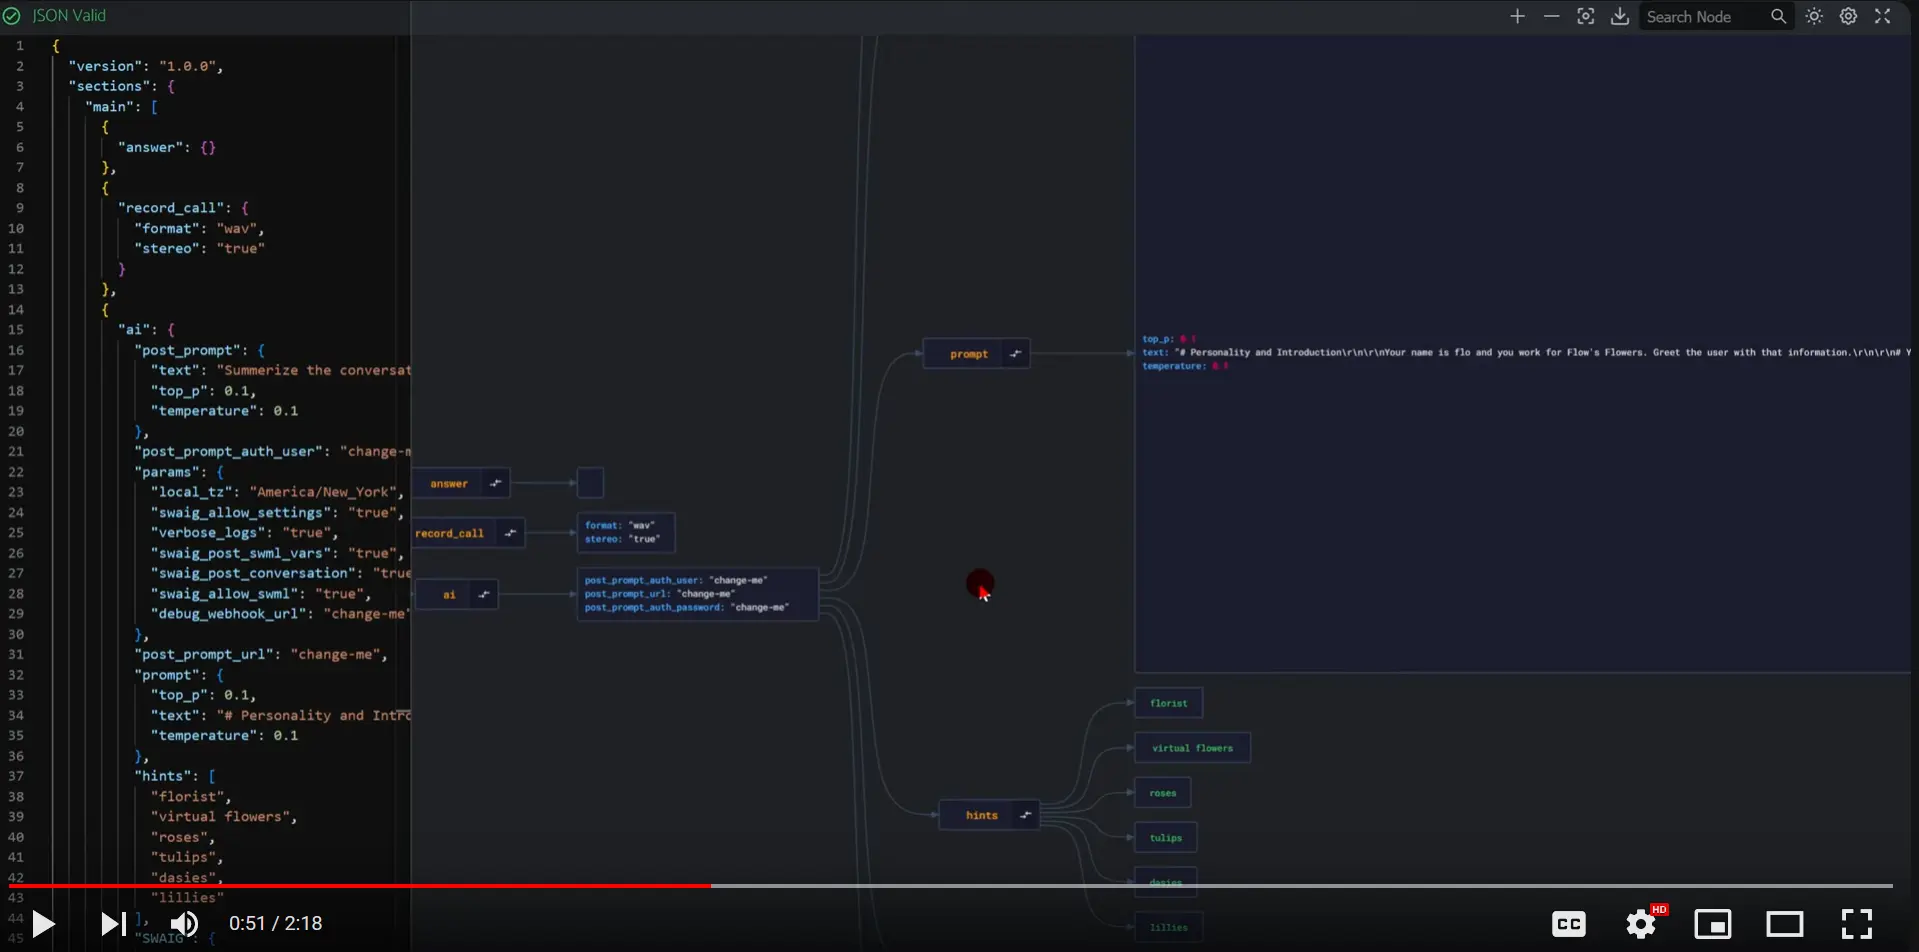 A screenshot of the video walkthrough of the SWML script on YouTube.